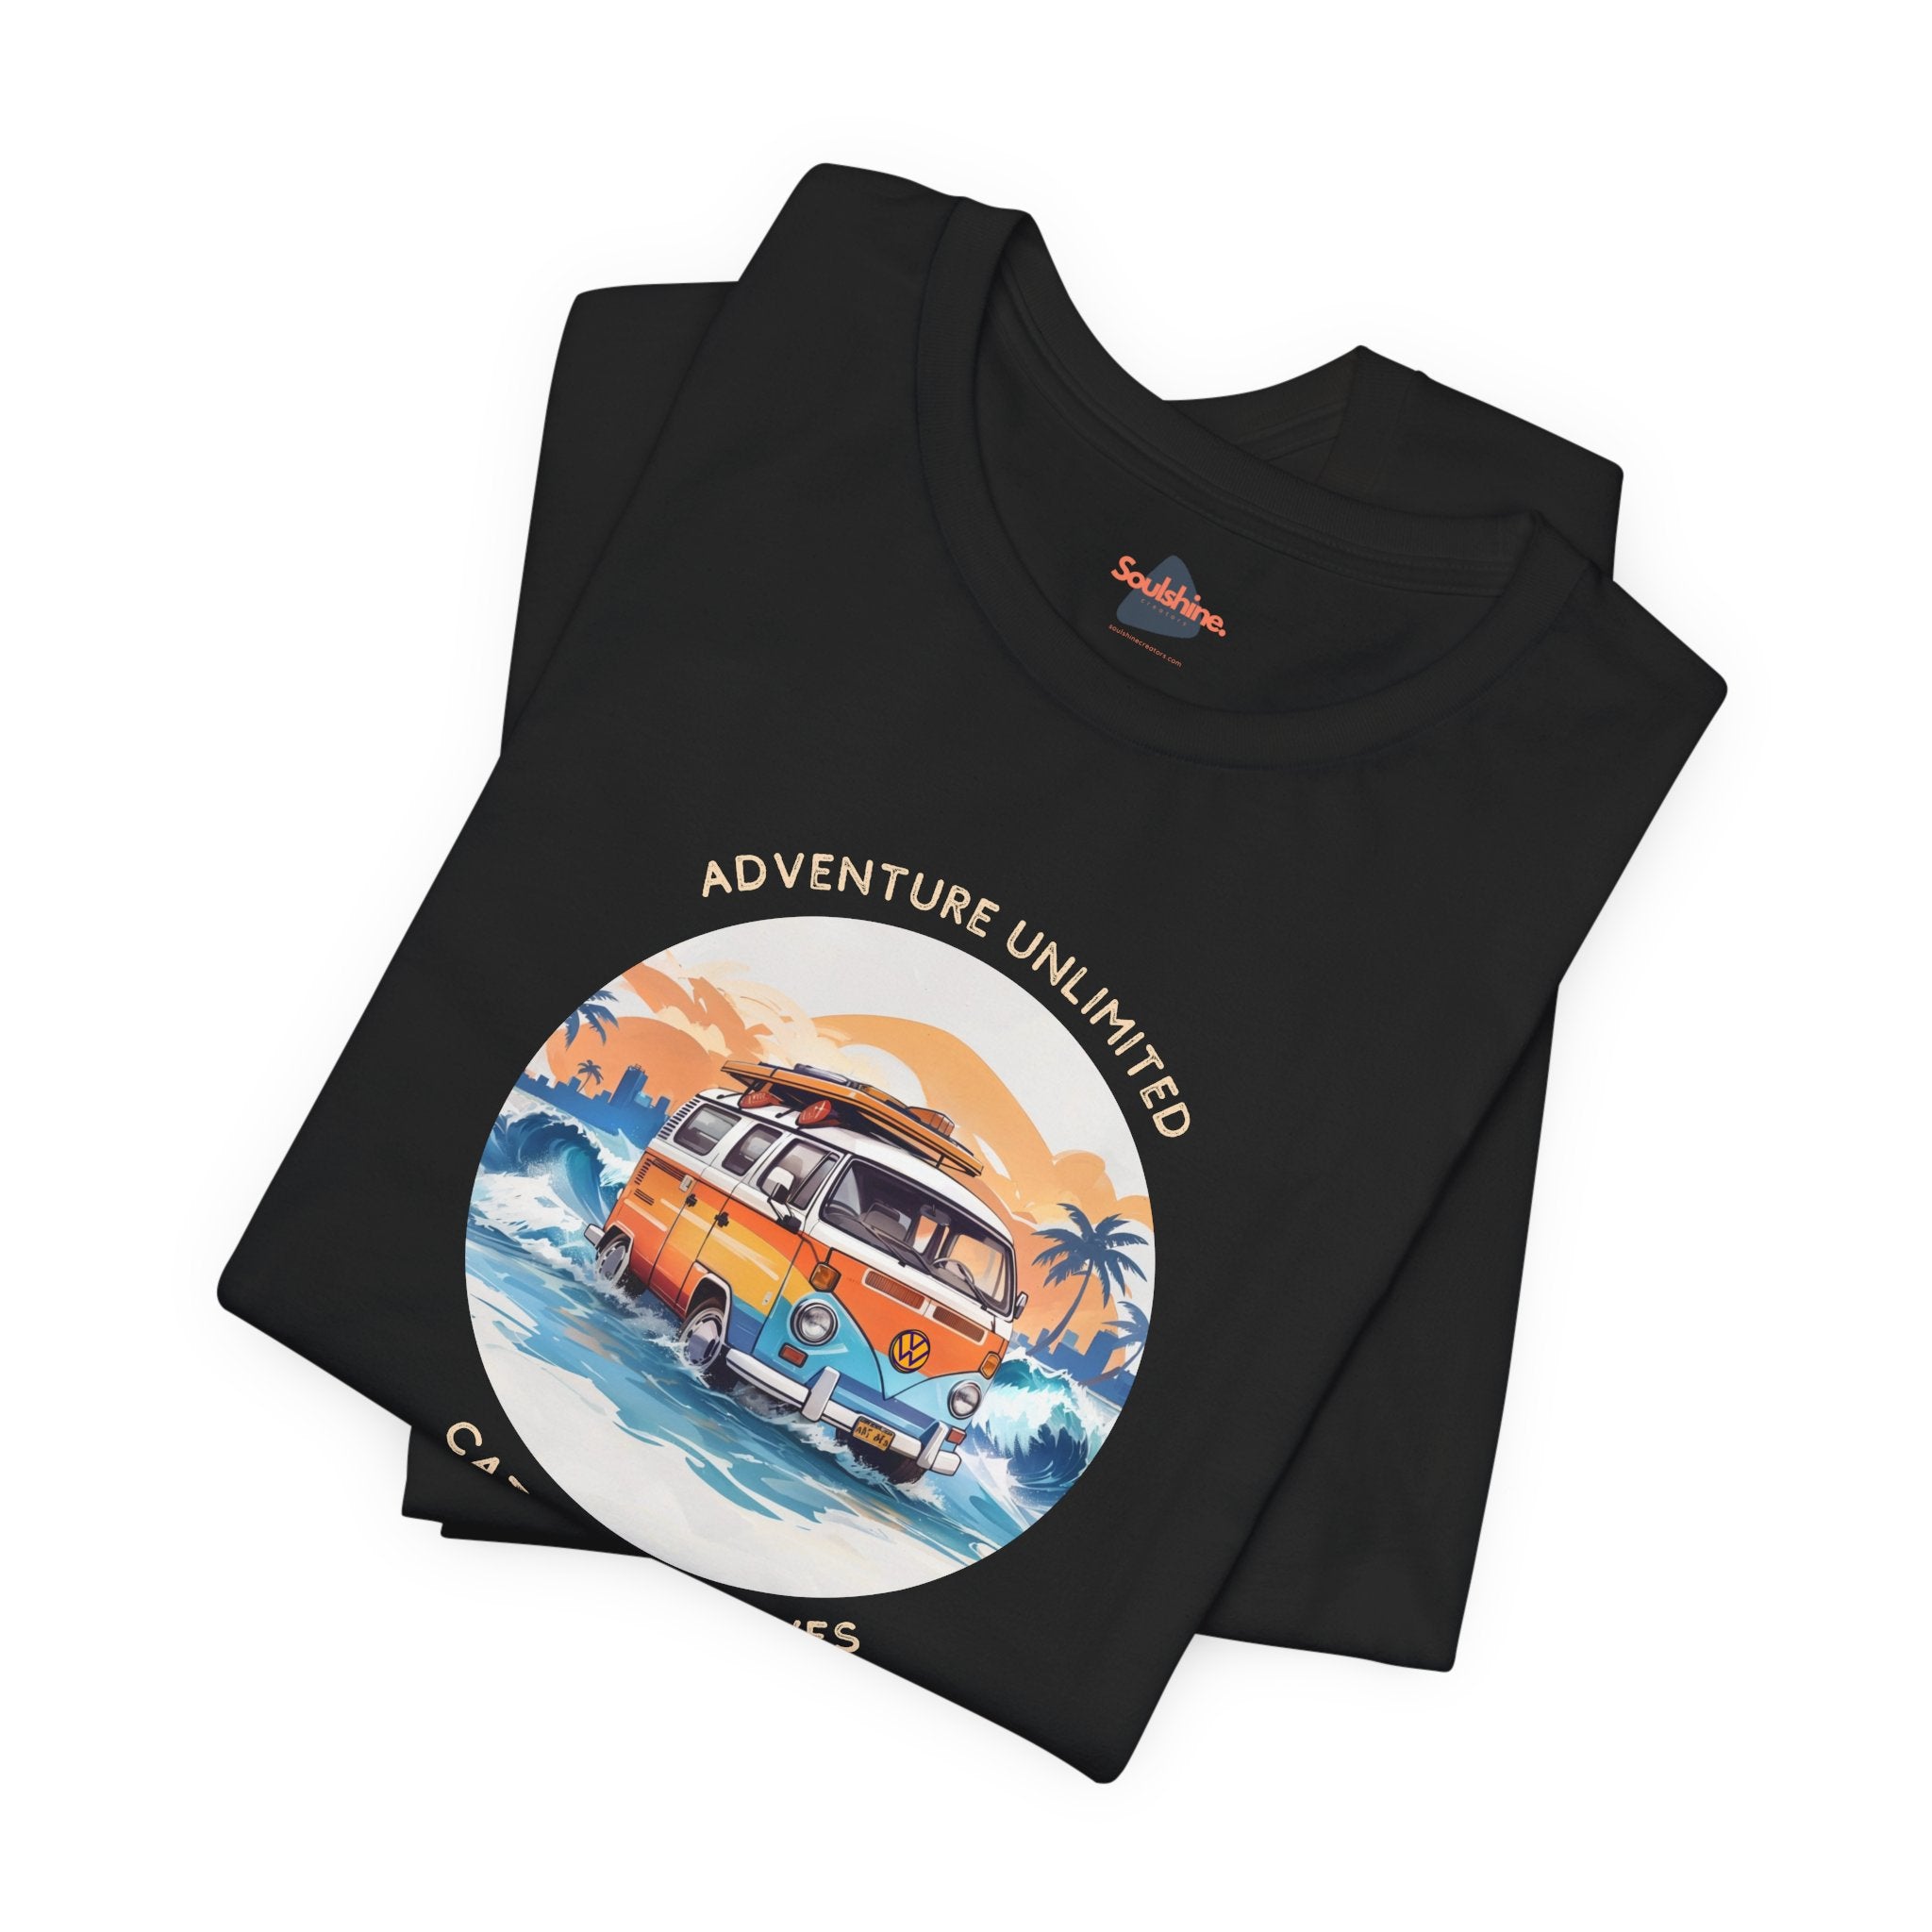 Adventure Unlimited unisex jersey short sleeve tee with direct-to-garment printed van and surfboard design